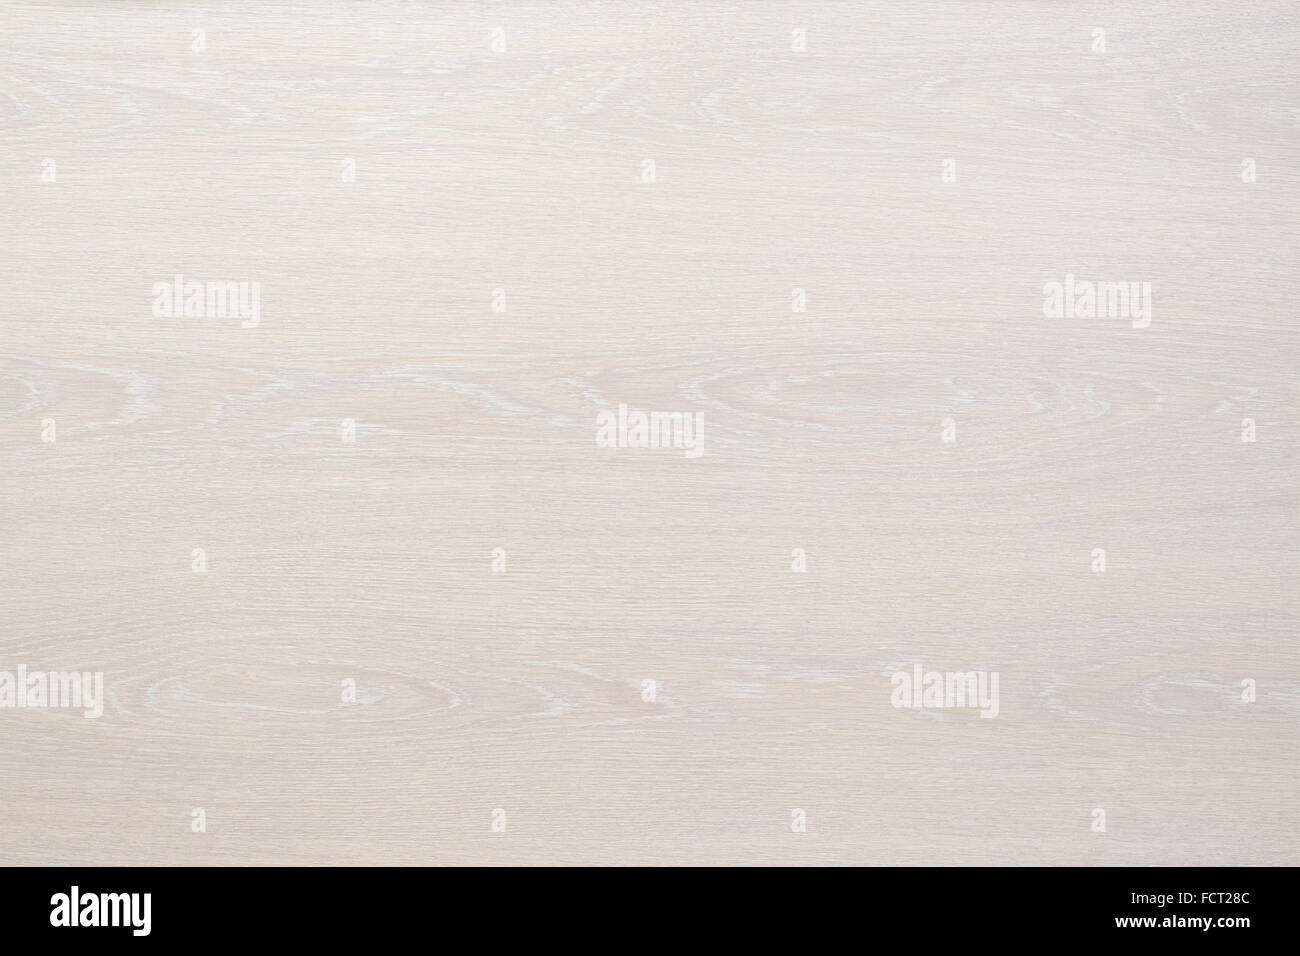 Texture of wood background closeup Stock Photo